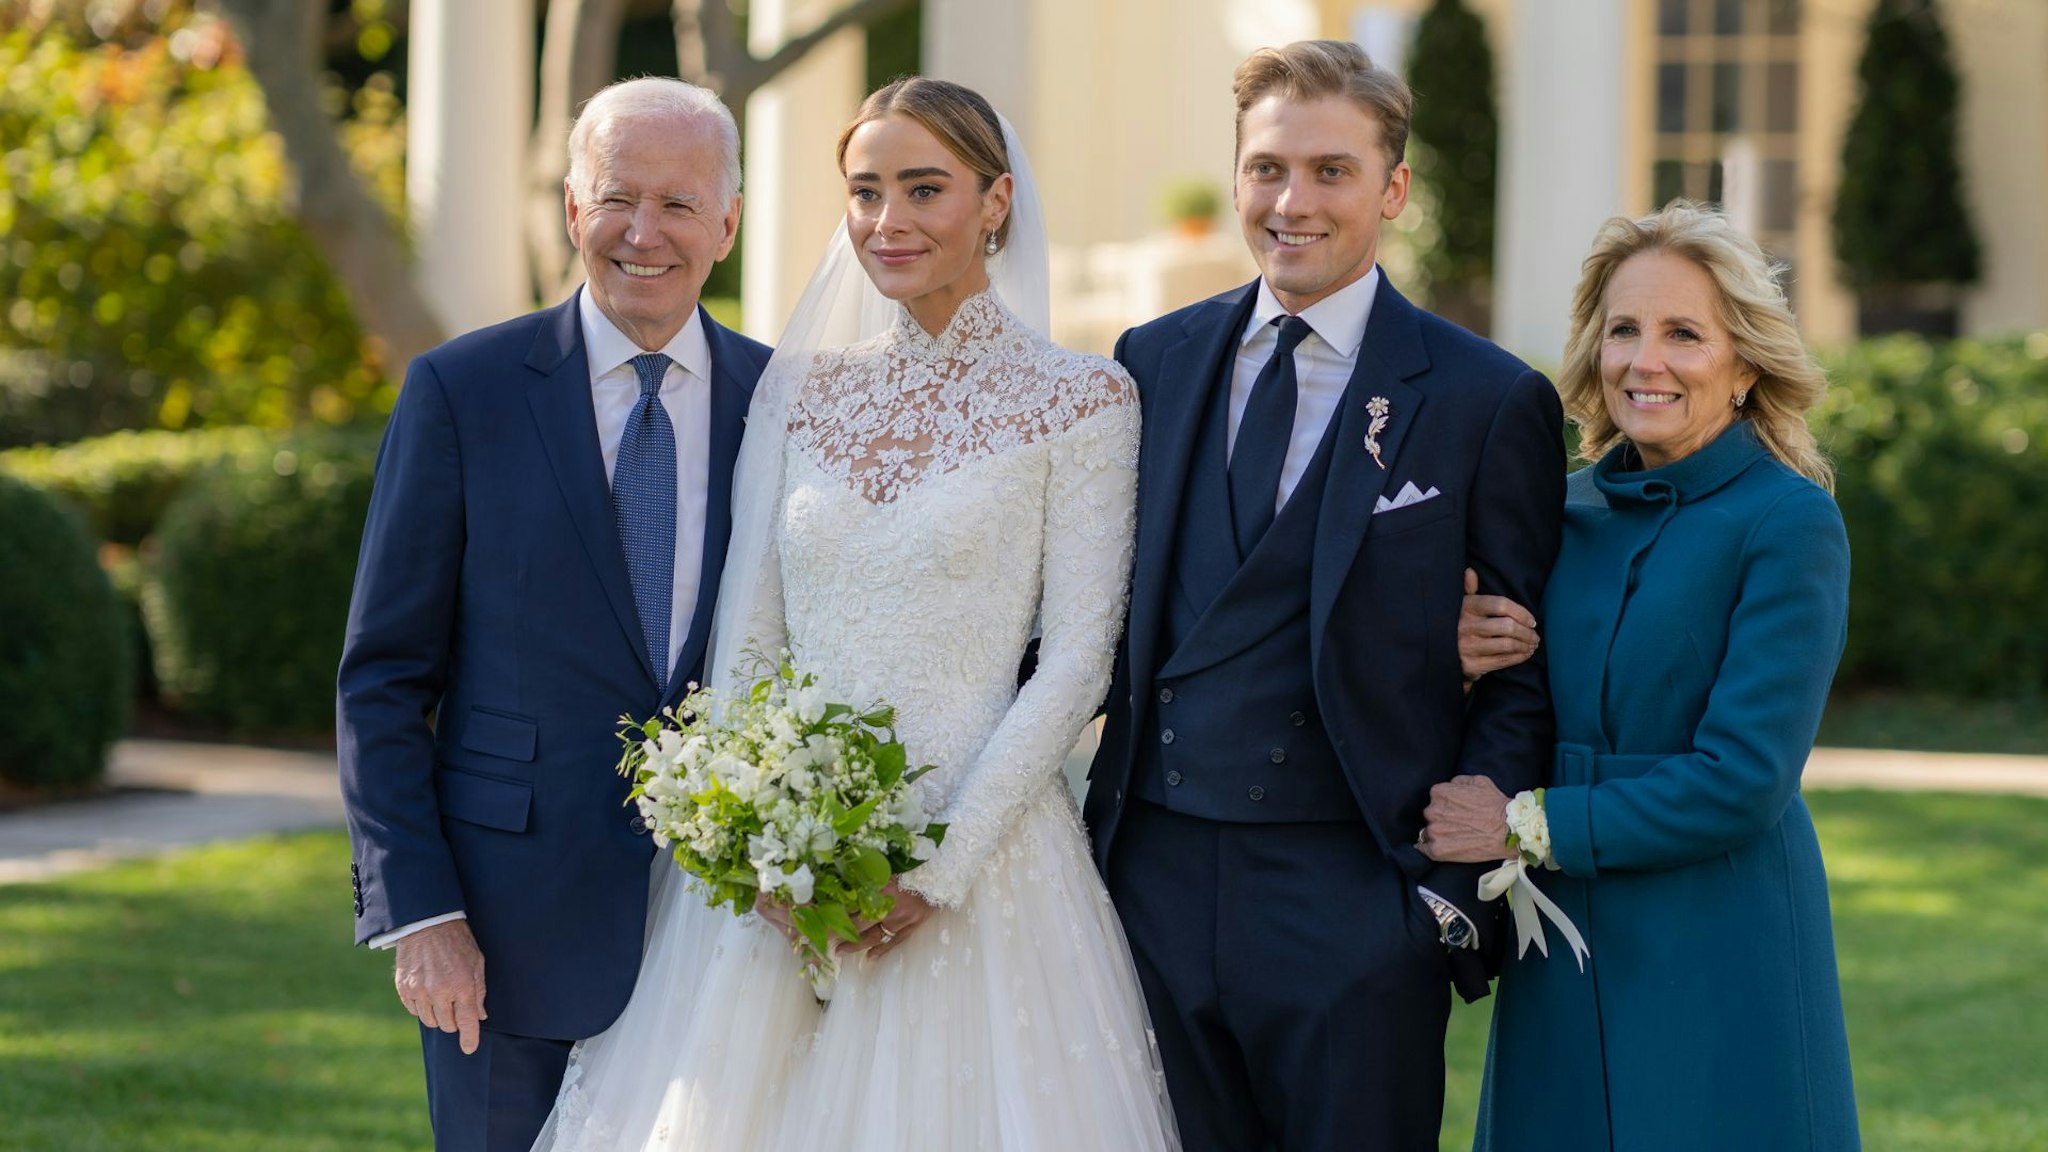 WASHINGTON, DC - NOVEMBER 19: In this handout provided by The White House, President Joe Biden and First Lady Jill Biden attend the wedding of Peter Neal and Naomi Biden Neal on the South Lawn of the White House on November 19, 2022 in Washington DC.